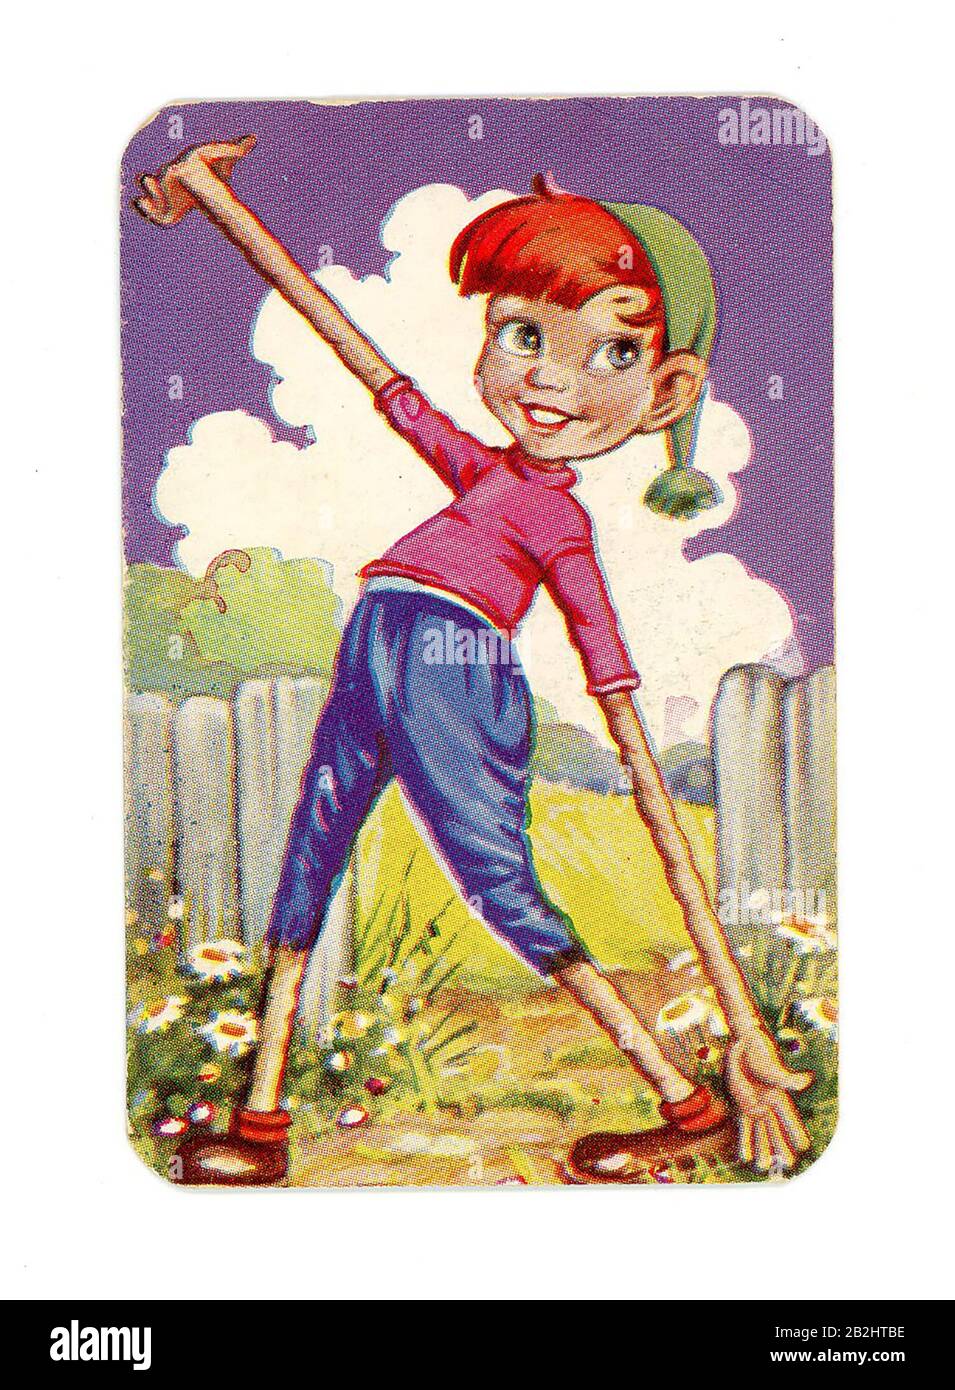 Twizzle - Snap. Children's card game (1957 - 1959) Stock Photo